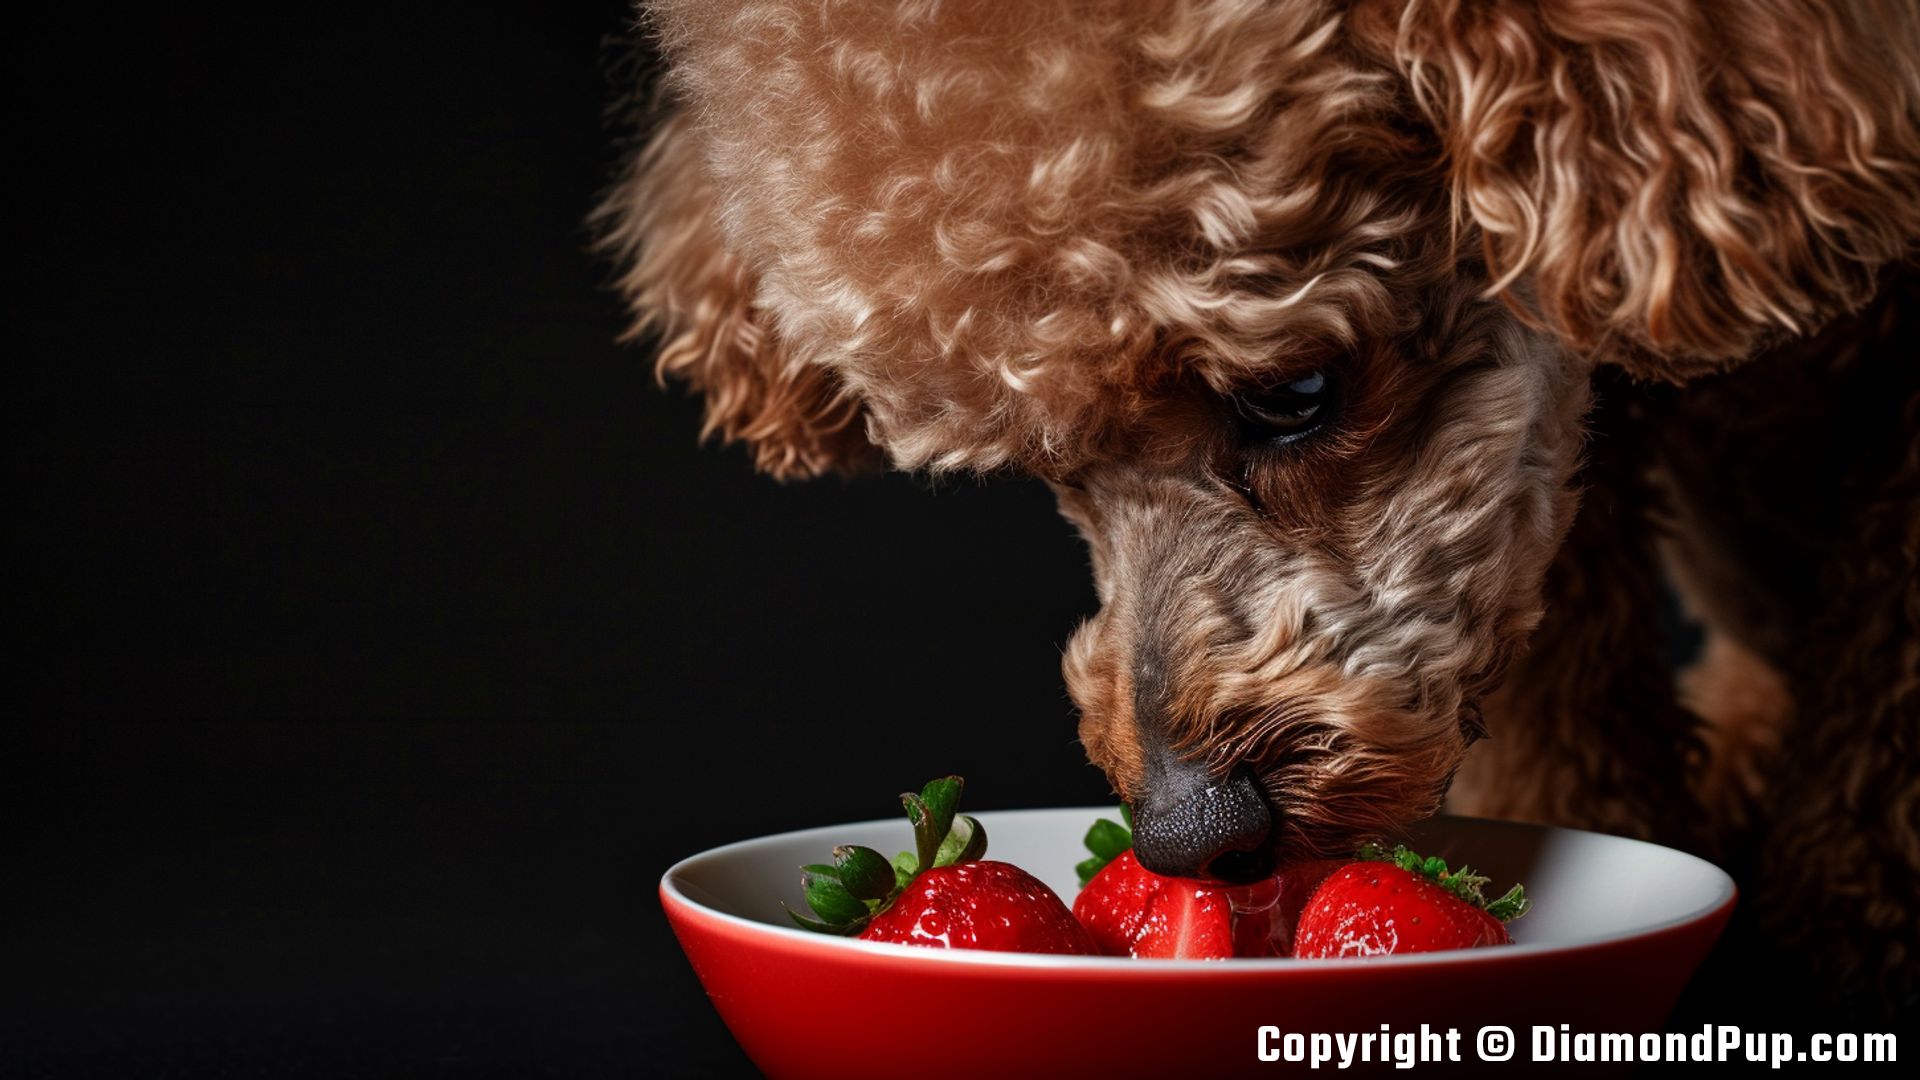 Photograph of an Adorable Poodle Eating Strawberries